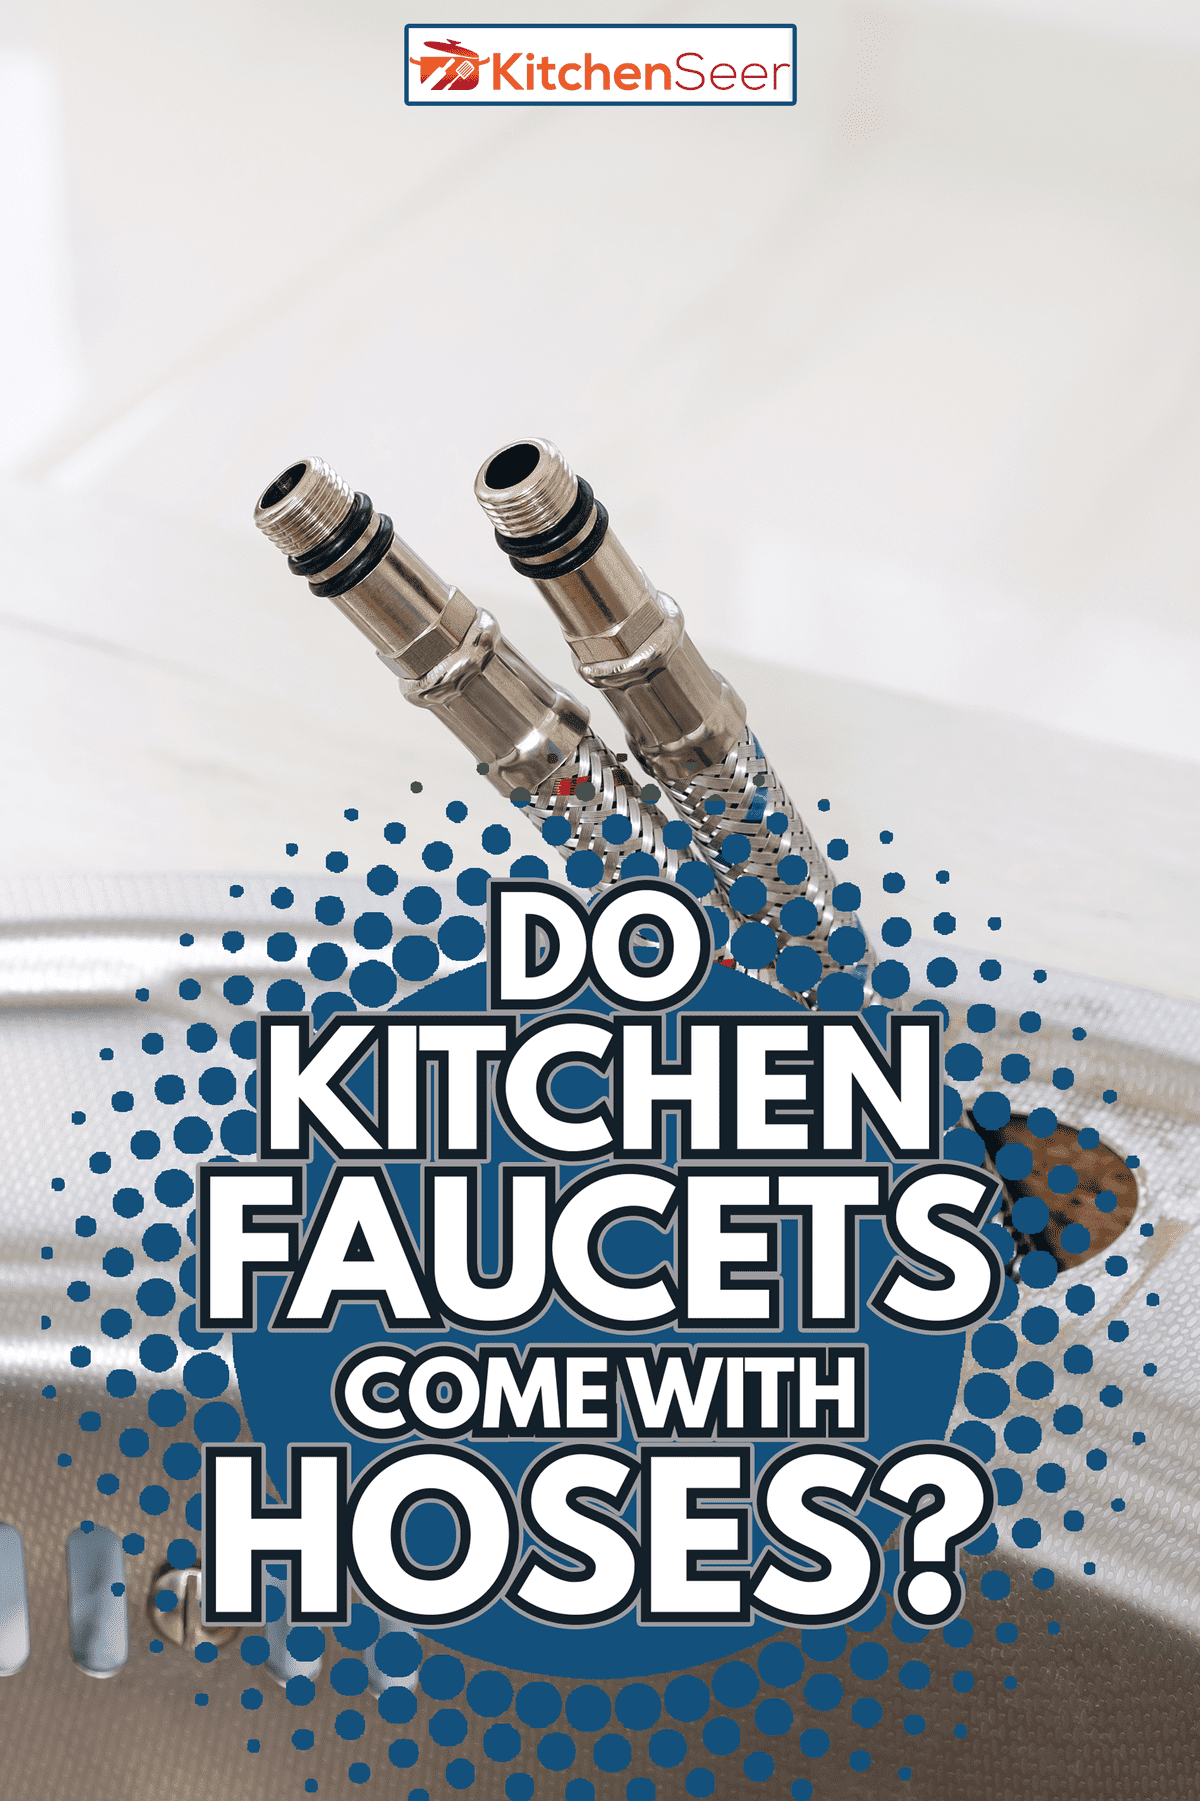 Flexible water hoses for cold and hot water to installation of the kitchen faucet into a sink close-up - Do Kitchen Faucets Come With Hoses